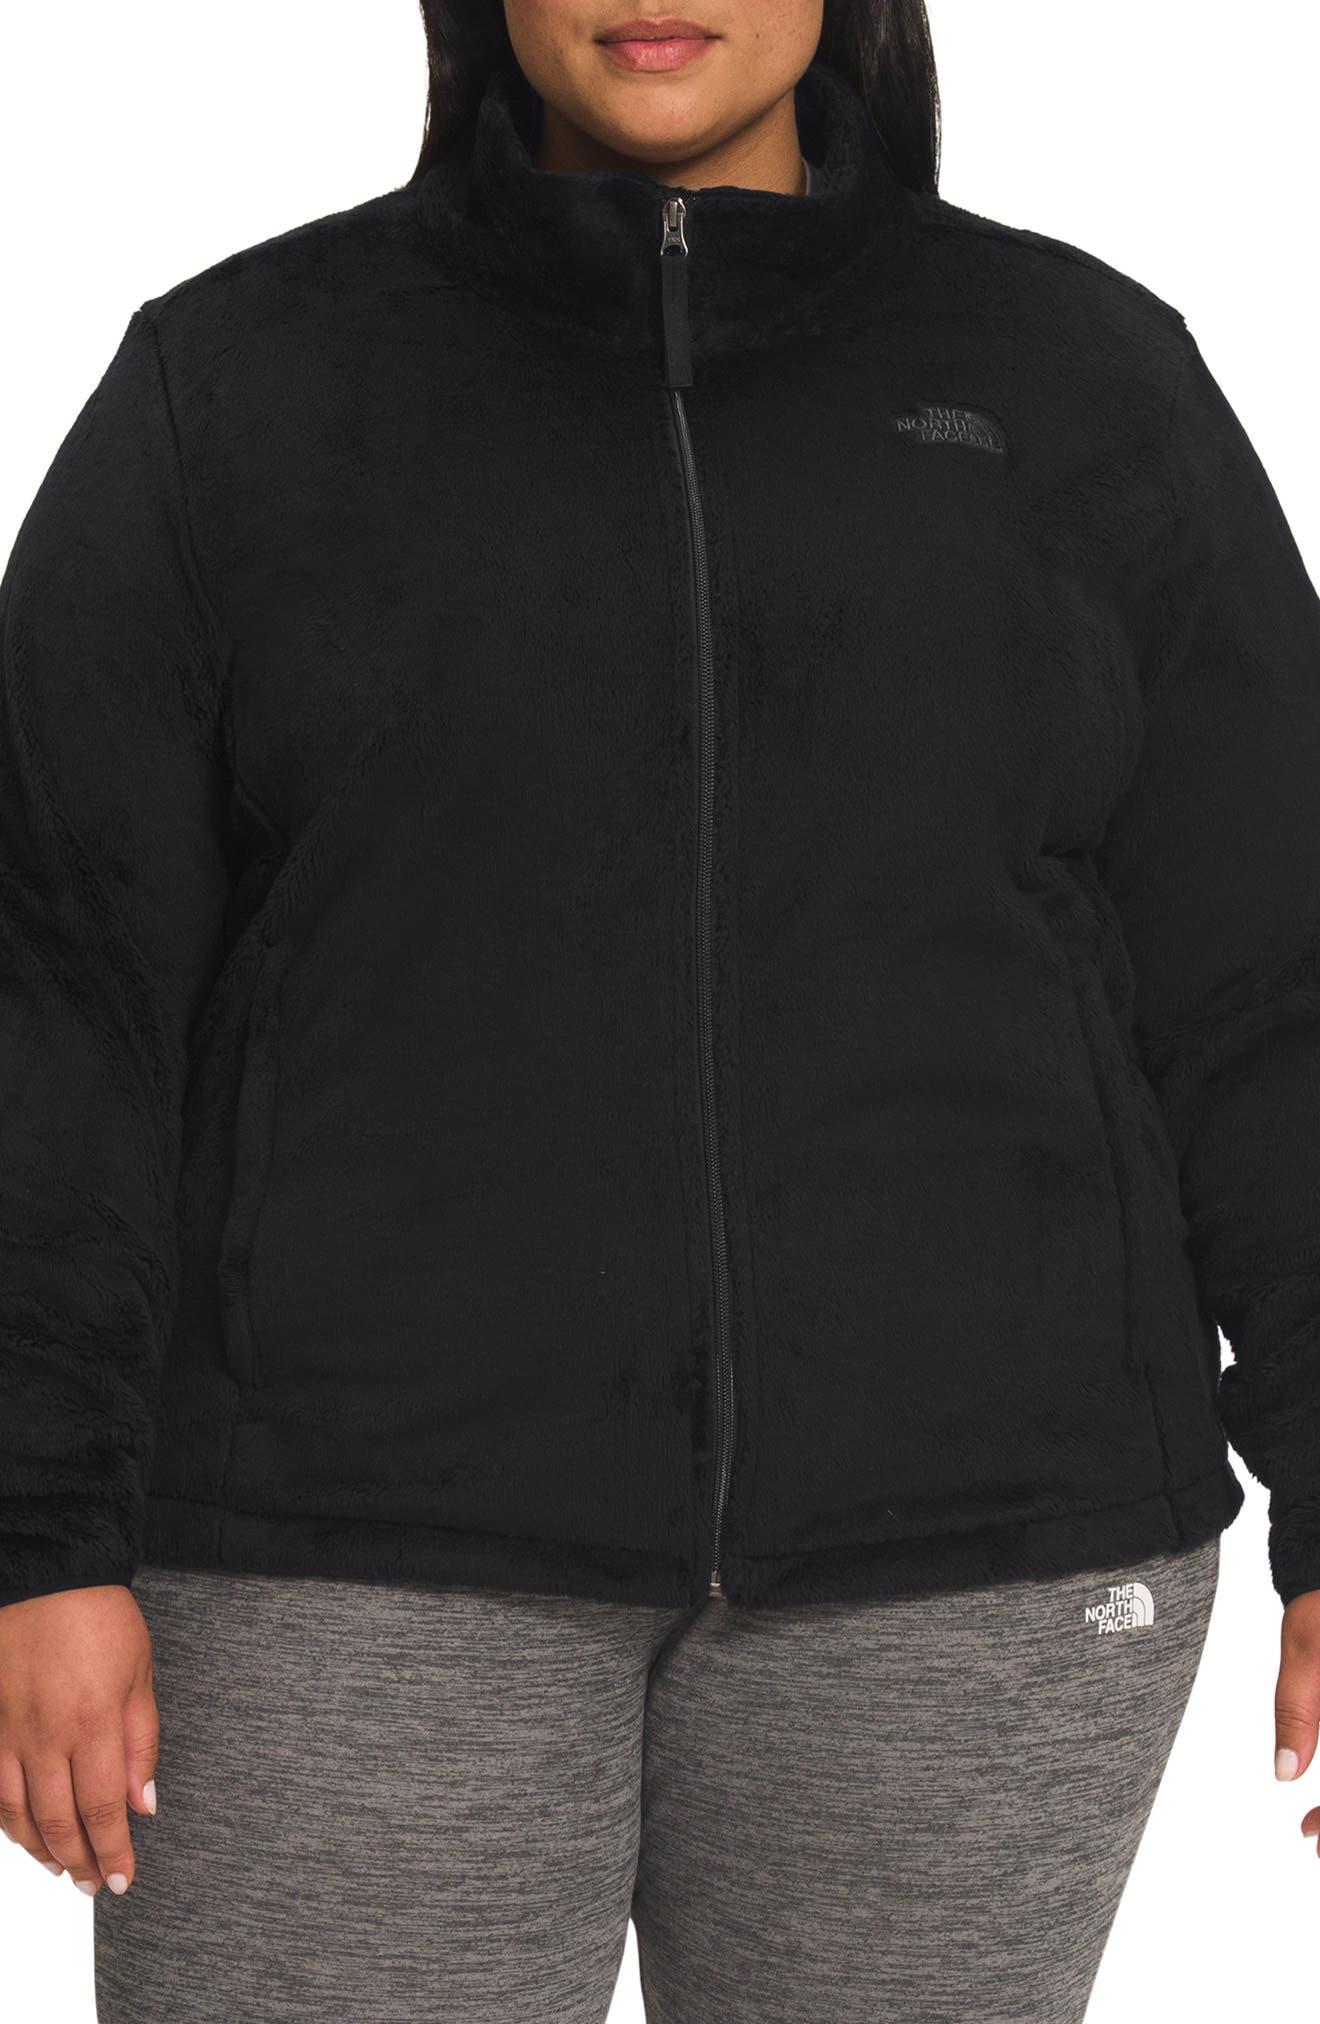 The North Face Plus Denali zip up fleece jacket in slate grey and black